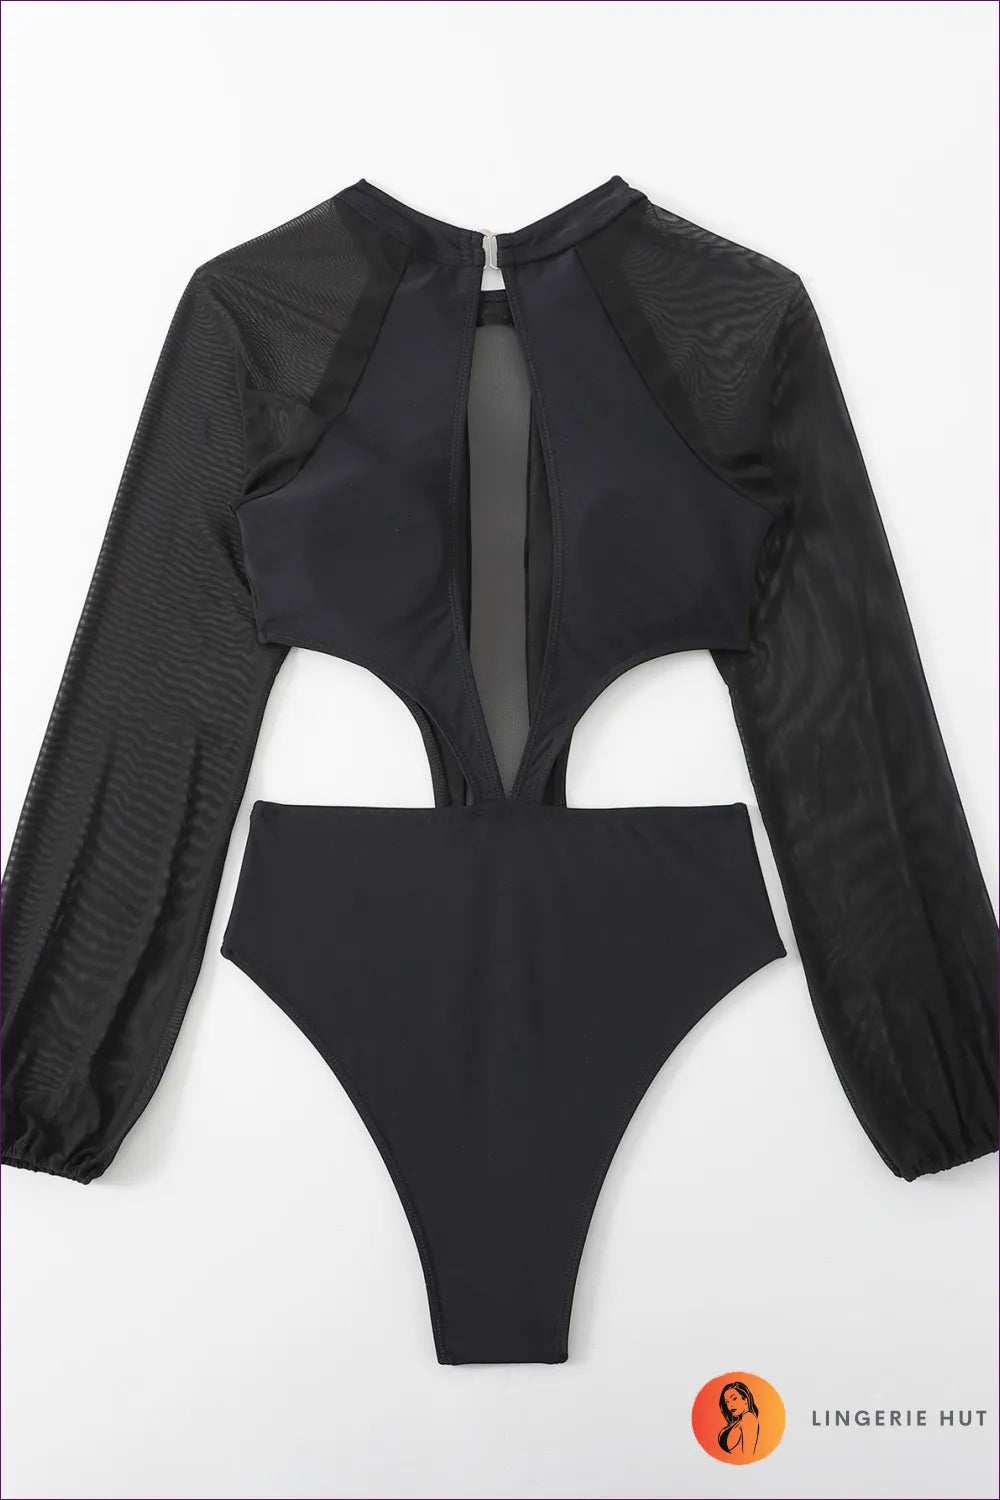 Unleash Your Boho Spirit With The Black One Piece Swimsuit - Limited Collection! Styling Tip Elevate Your